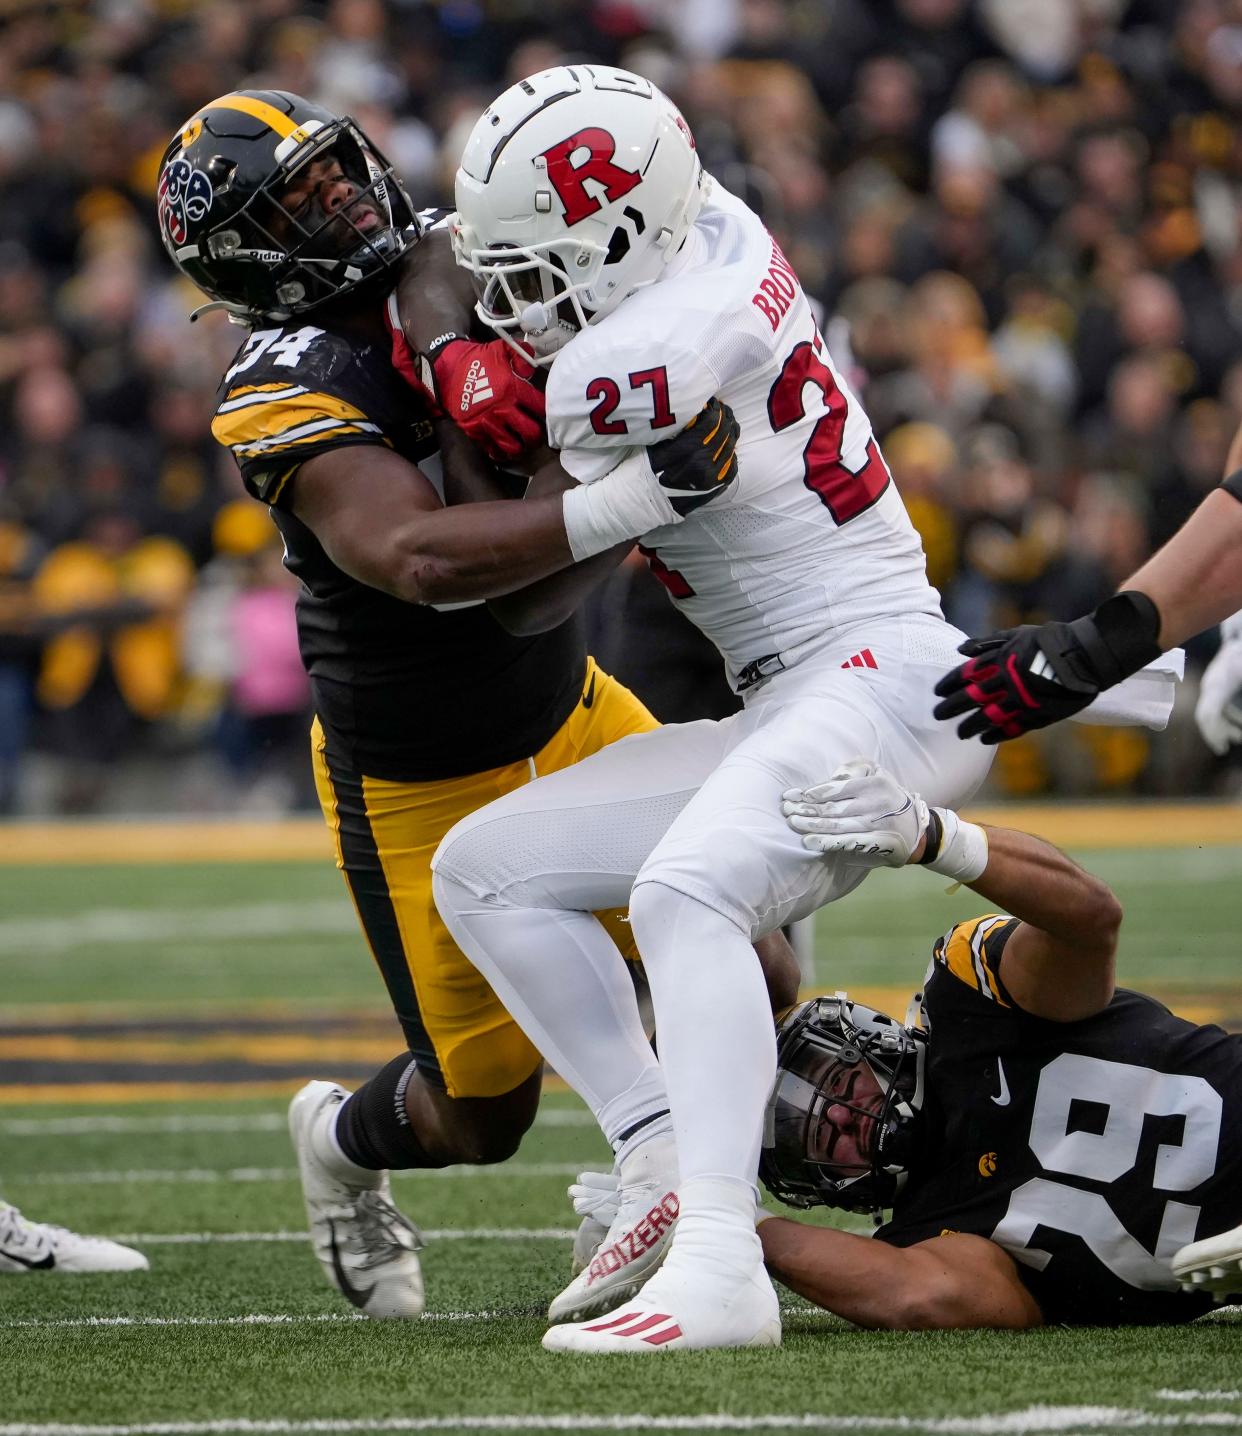 Iowa linebacker Jay Higgins (34) stops Rutgers running back Samuel Brown V (27) during the first half of an NCAA college football game, Saturday, Nov. 11, 2023, in Iowa City, Iowa. (AP Photo/Bryon Houlgrave)